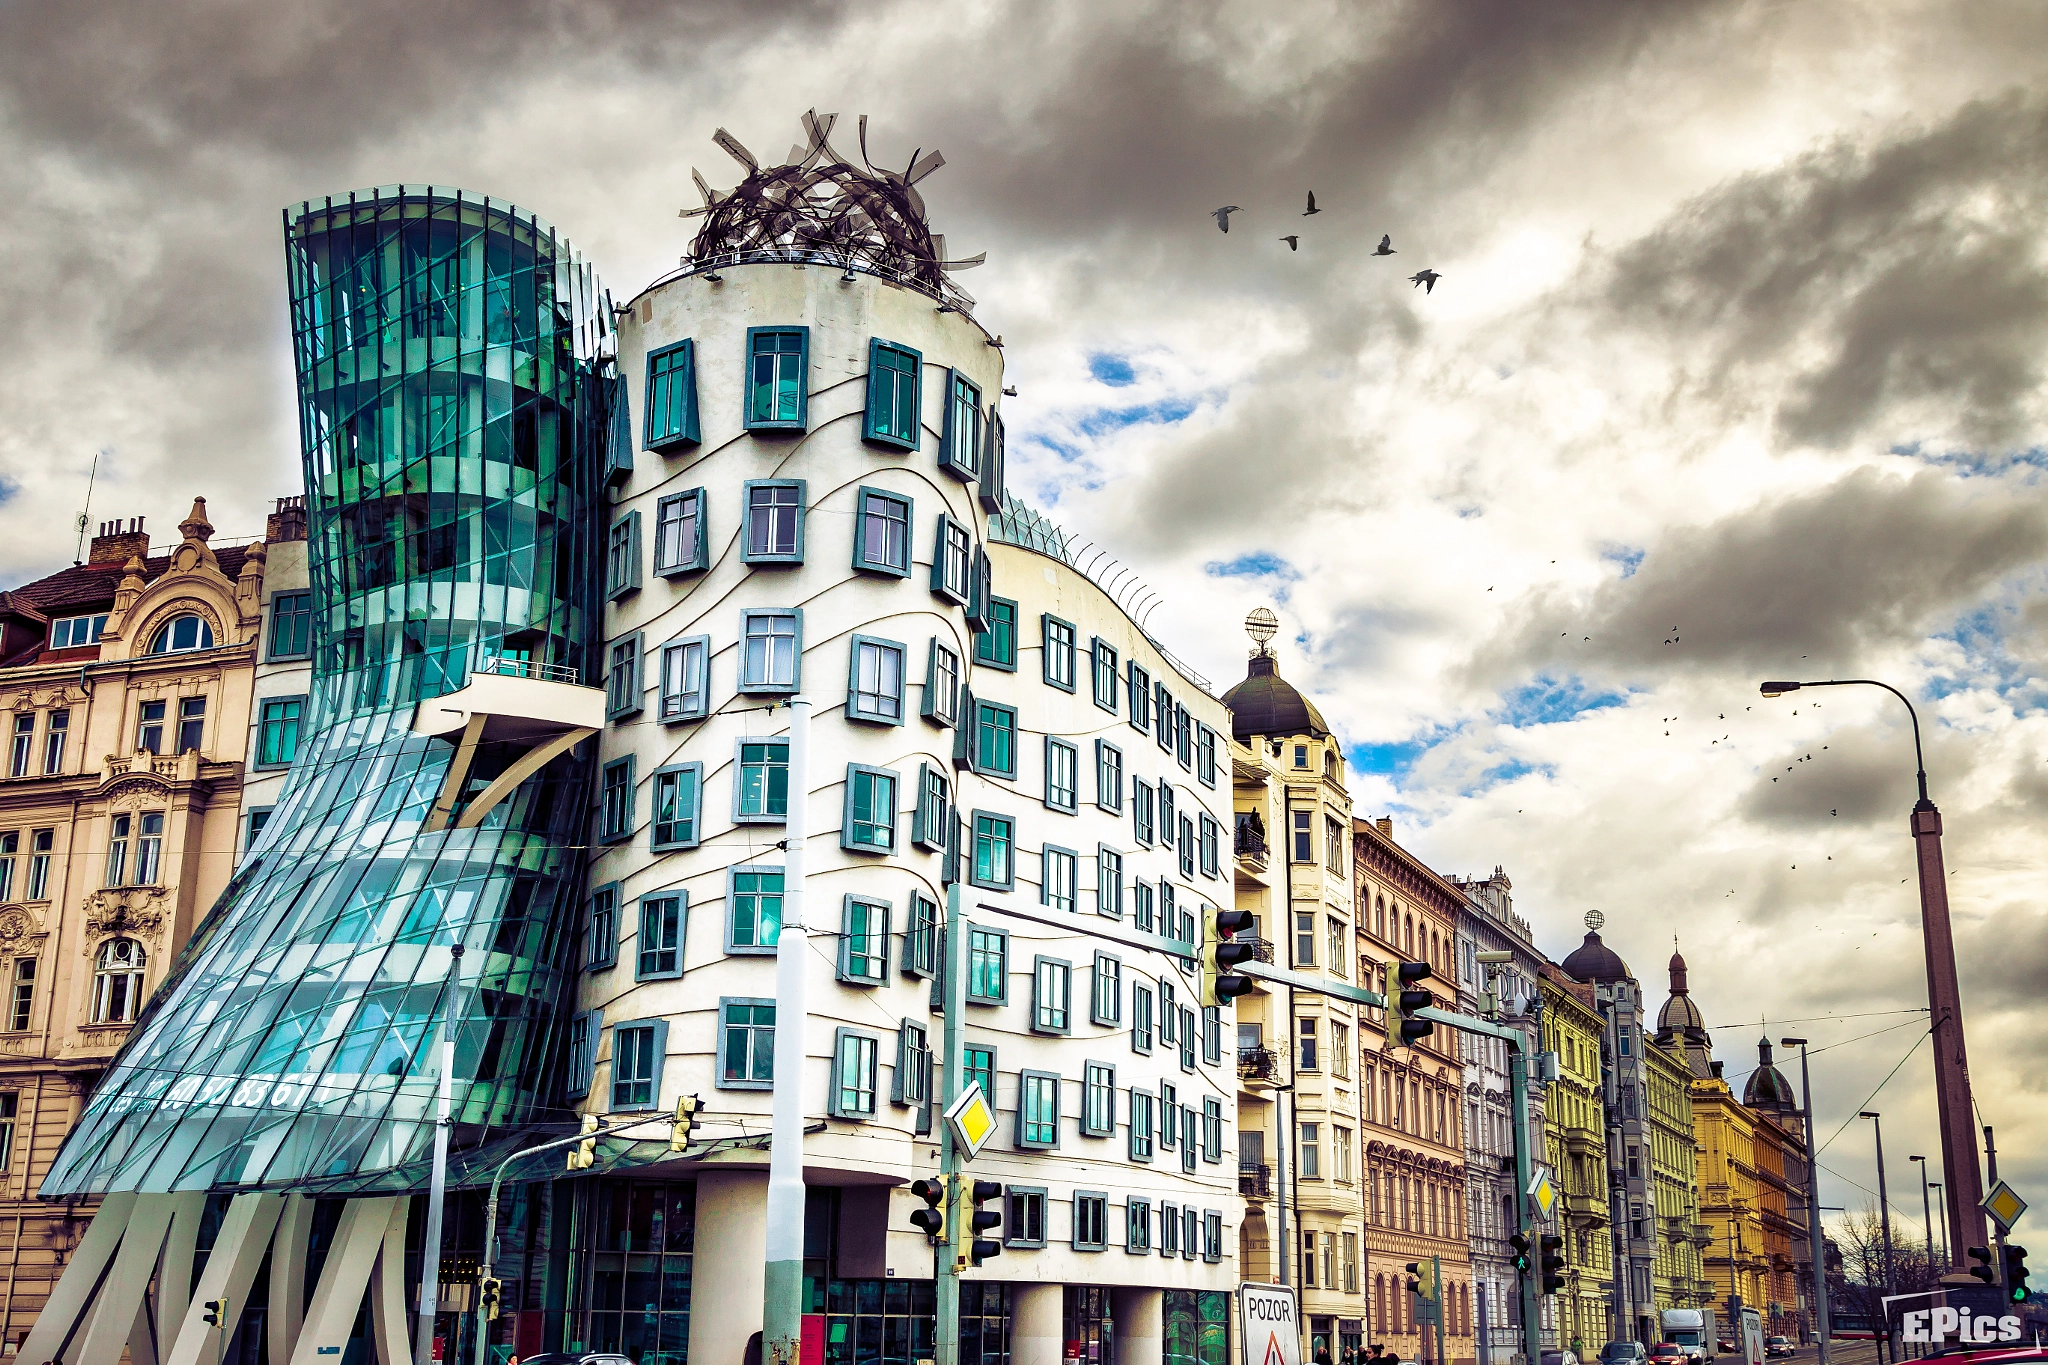 Canon EOS 7D Mark II + Sigma 24-105mm f/4 DG OS HSM | A sample photo. Dancing house in prague photography